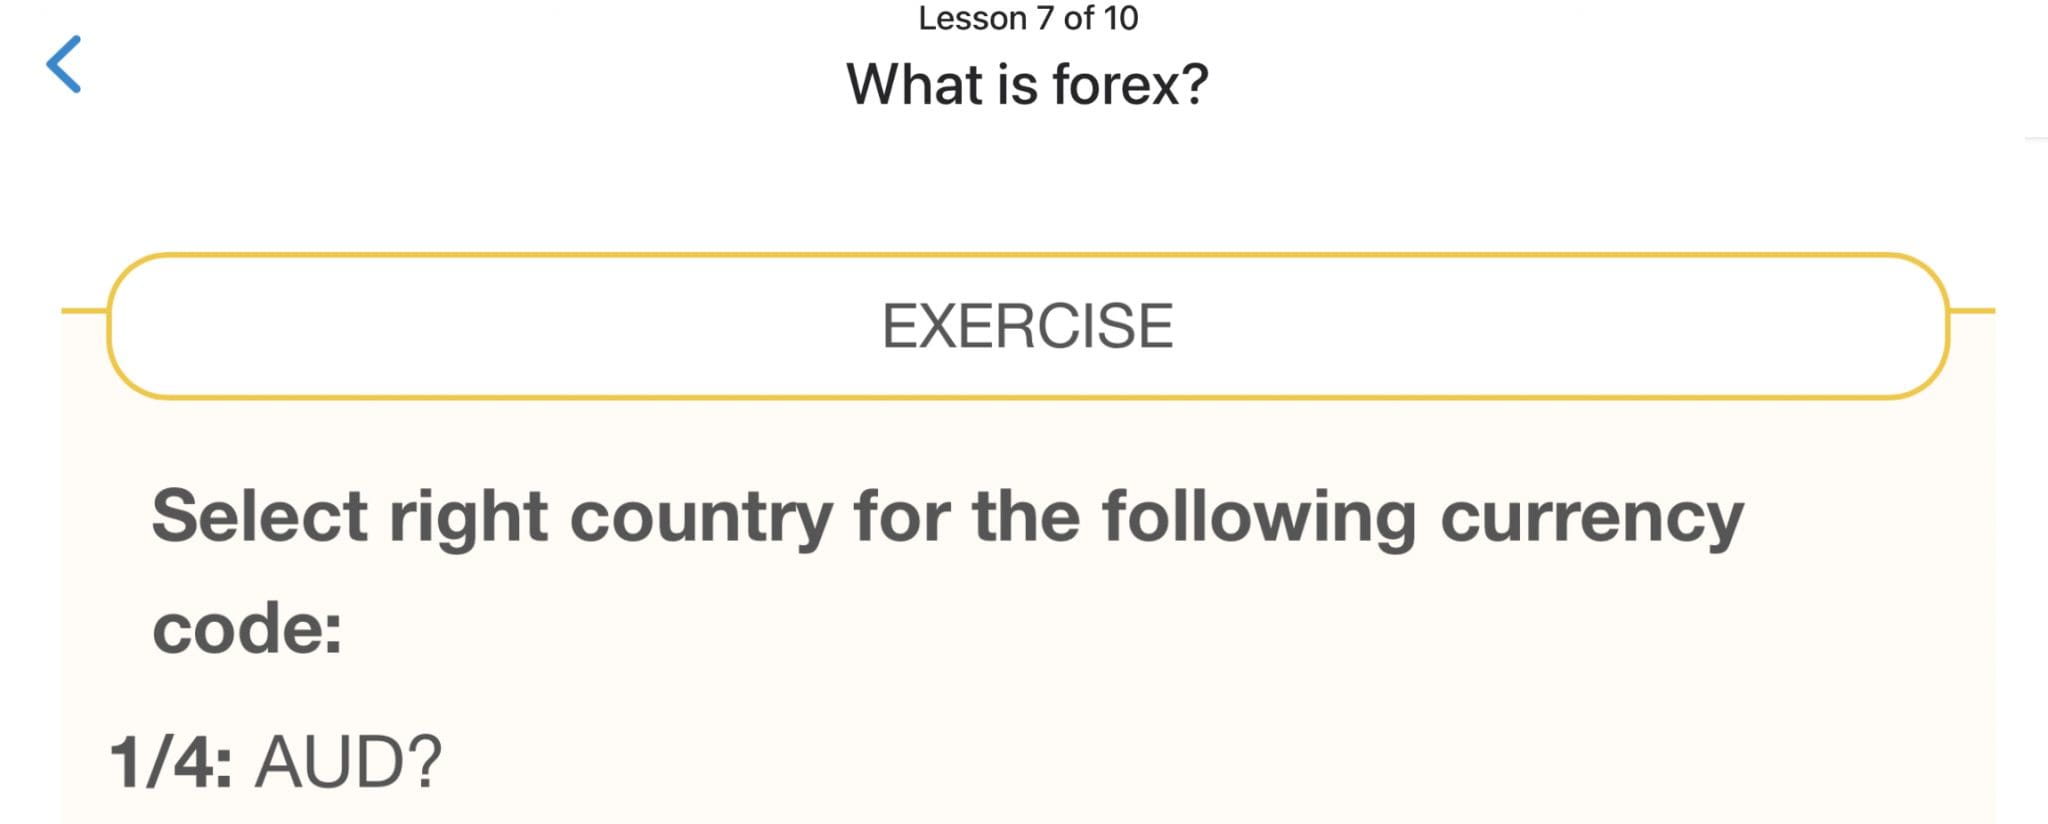 Answering forex trading exercise on IG Academy App